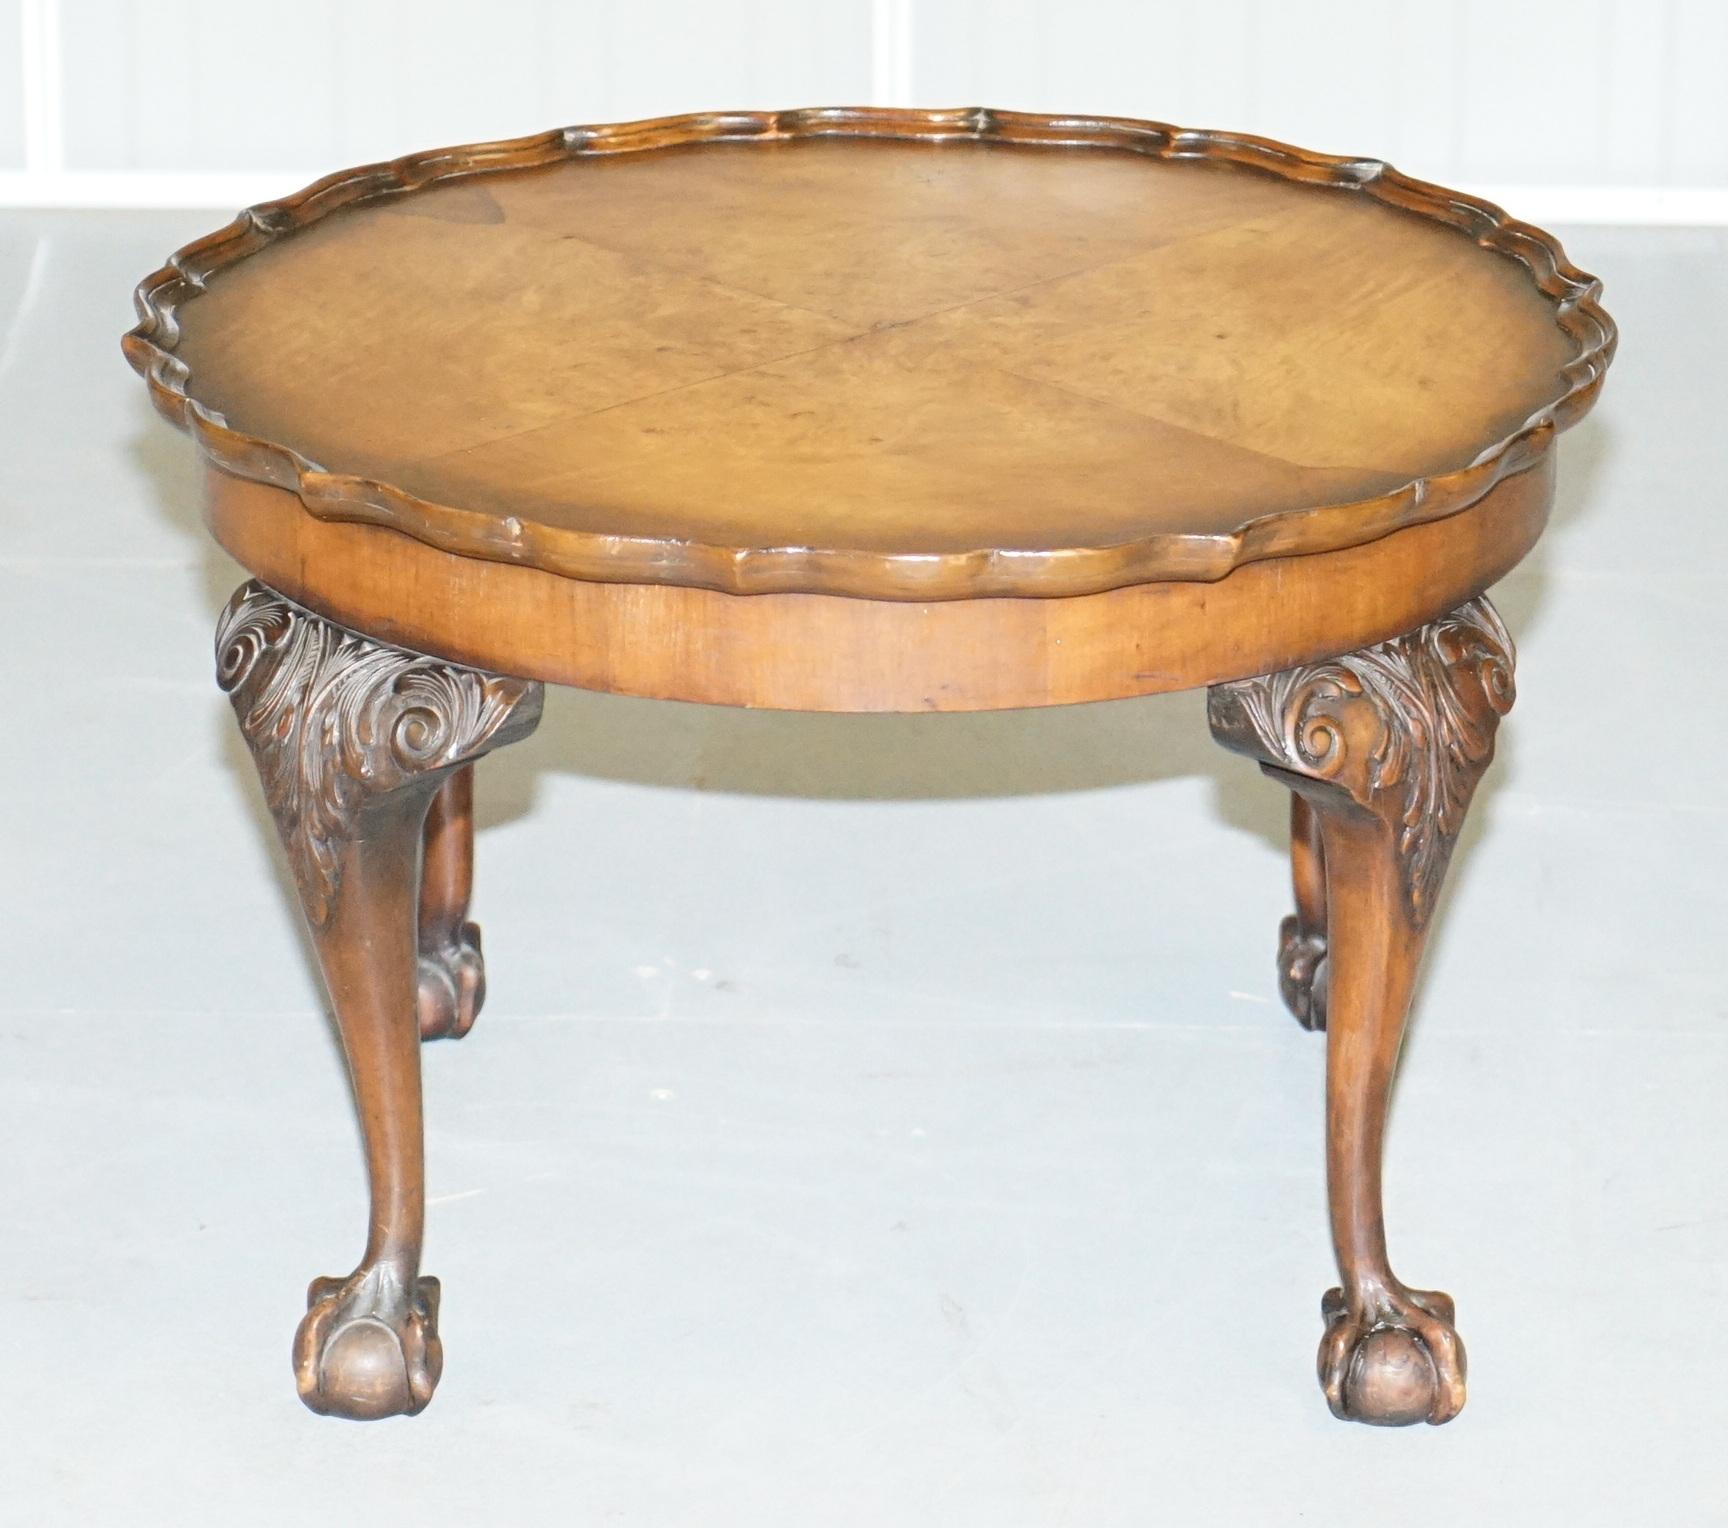 We are delighted to offer for sale this lovely vintage hand made coffee table with interictally carved claw and ball feet and pie crust edge

A very good looking well made and decorative coffee table, circa 1940 but clearly in the style of the